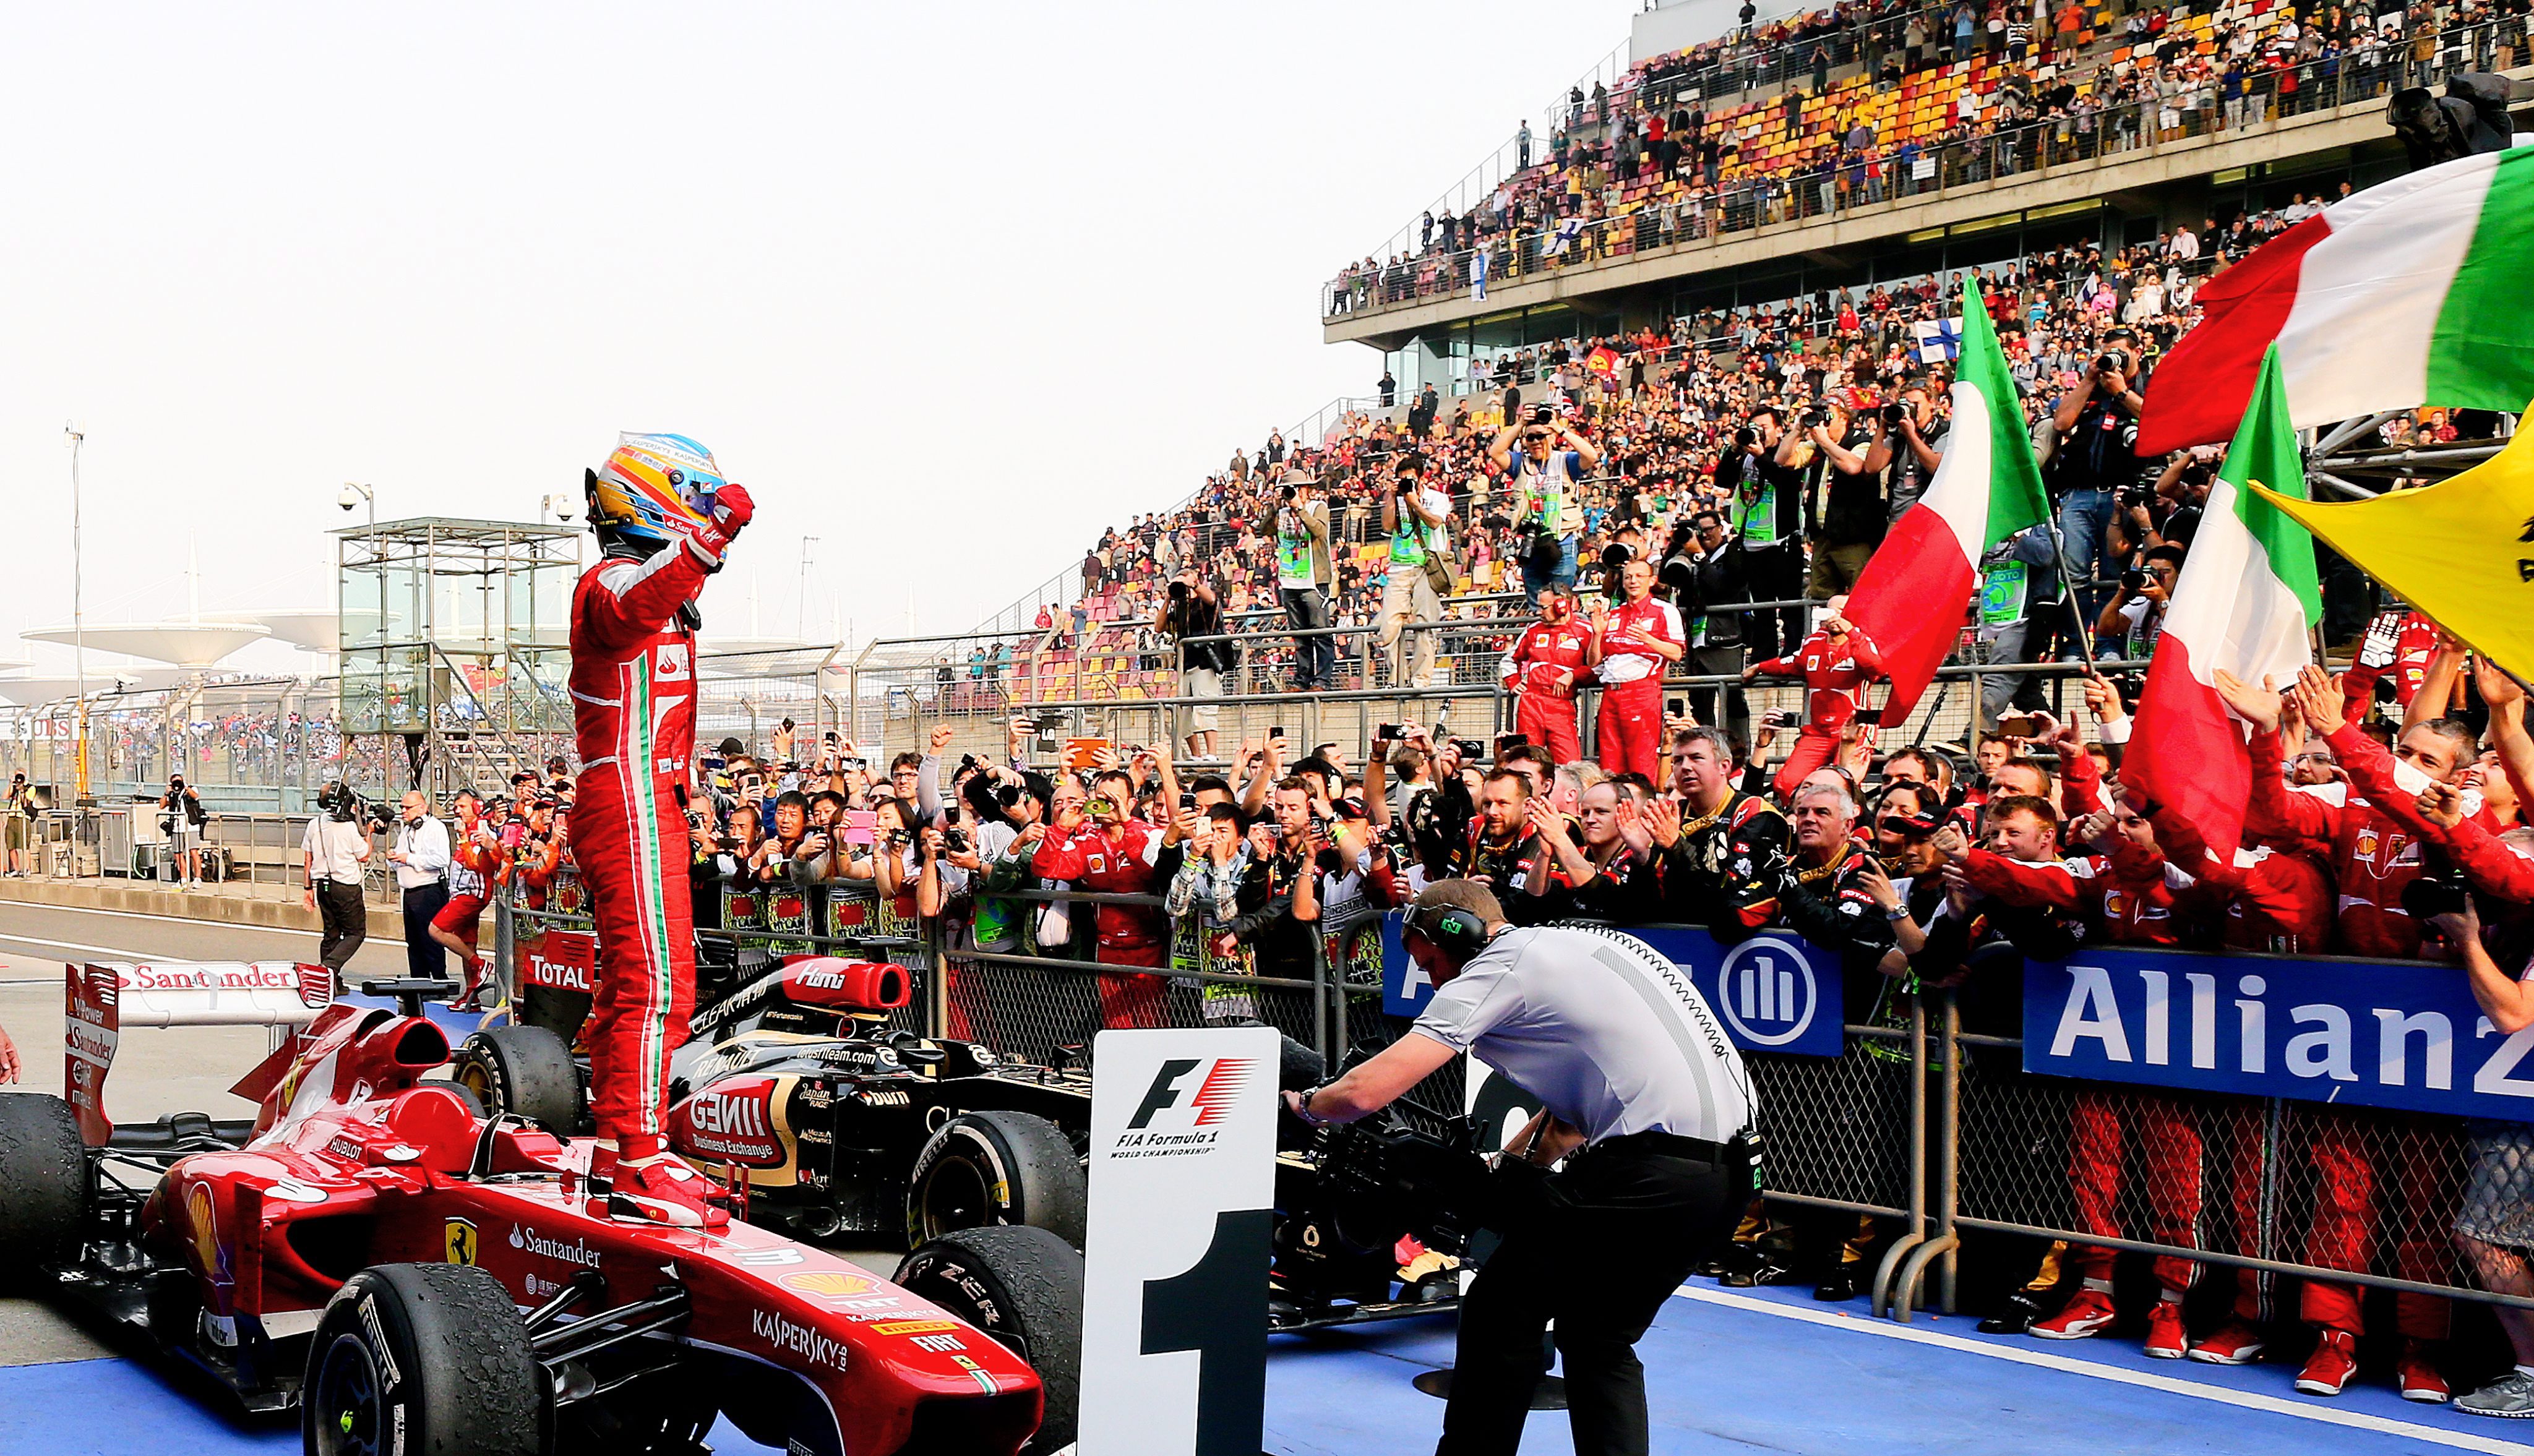 Spanish Formula One driver Fernando Alonso celebrates after winning the 2013 Chinese Formula One Grand Prix at the Shanghai International circuit in Shanghai on April 14, 2013. Photo: EPA